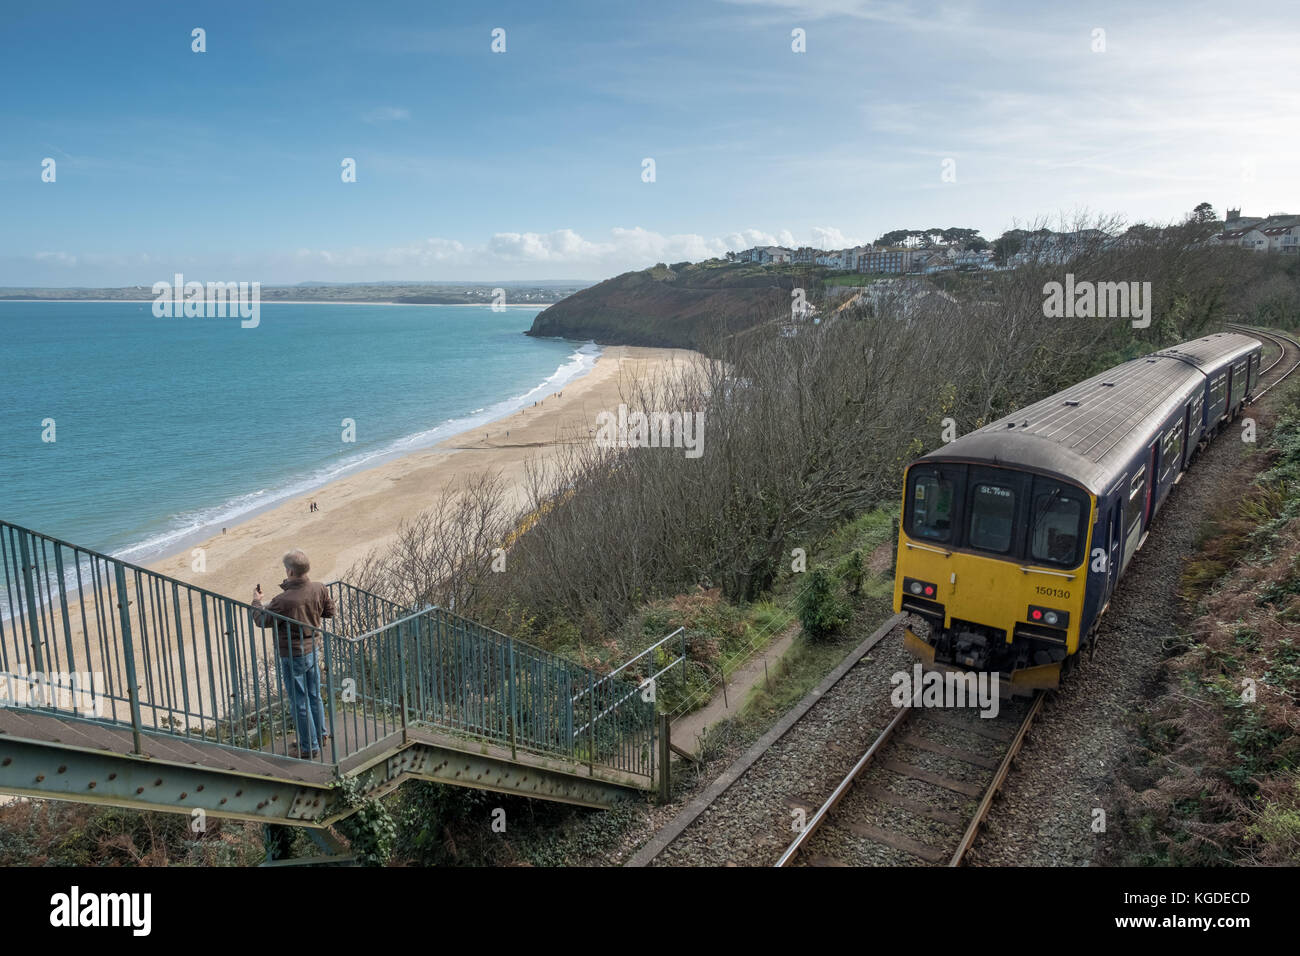 October 2017, a tourist takes a photo of Carbis Bay in Cornwall as a Great Western Railway train drives past in the background Stock Photo